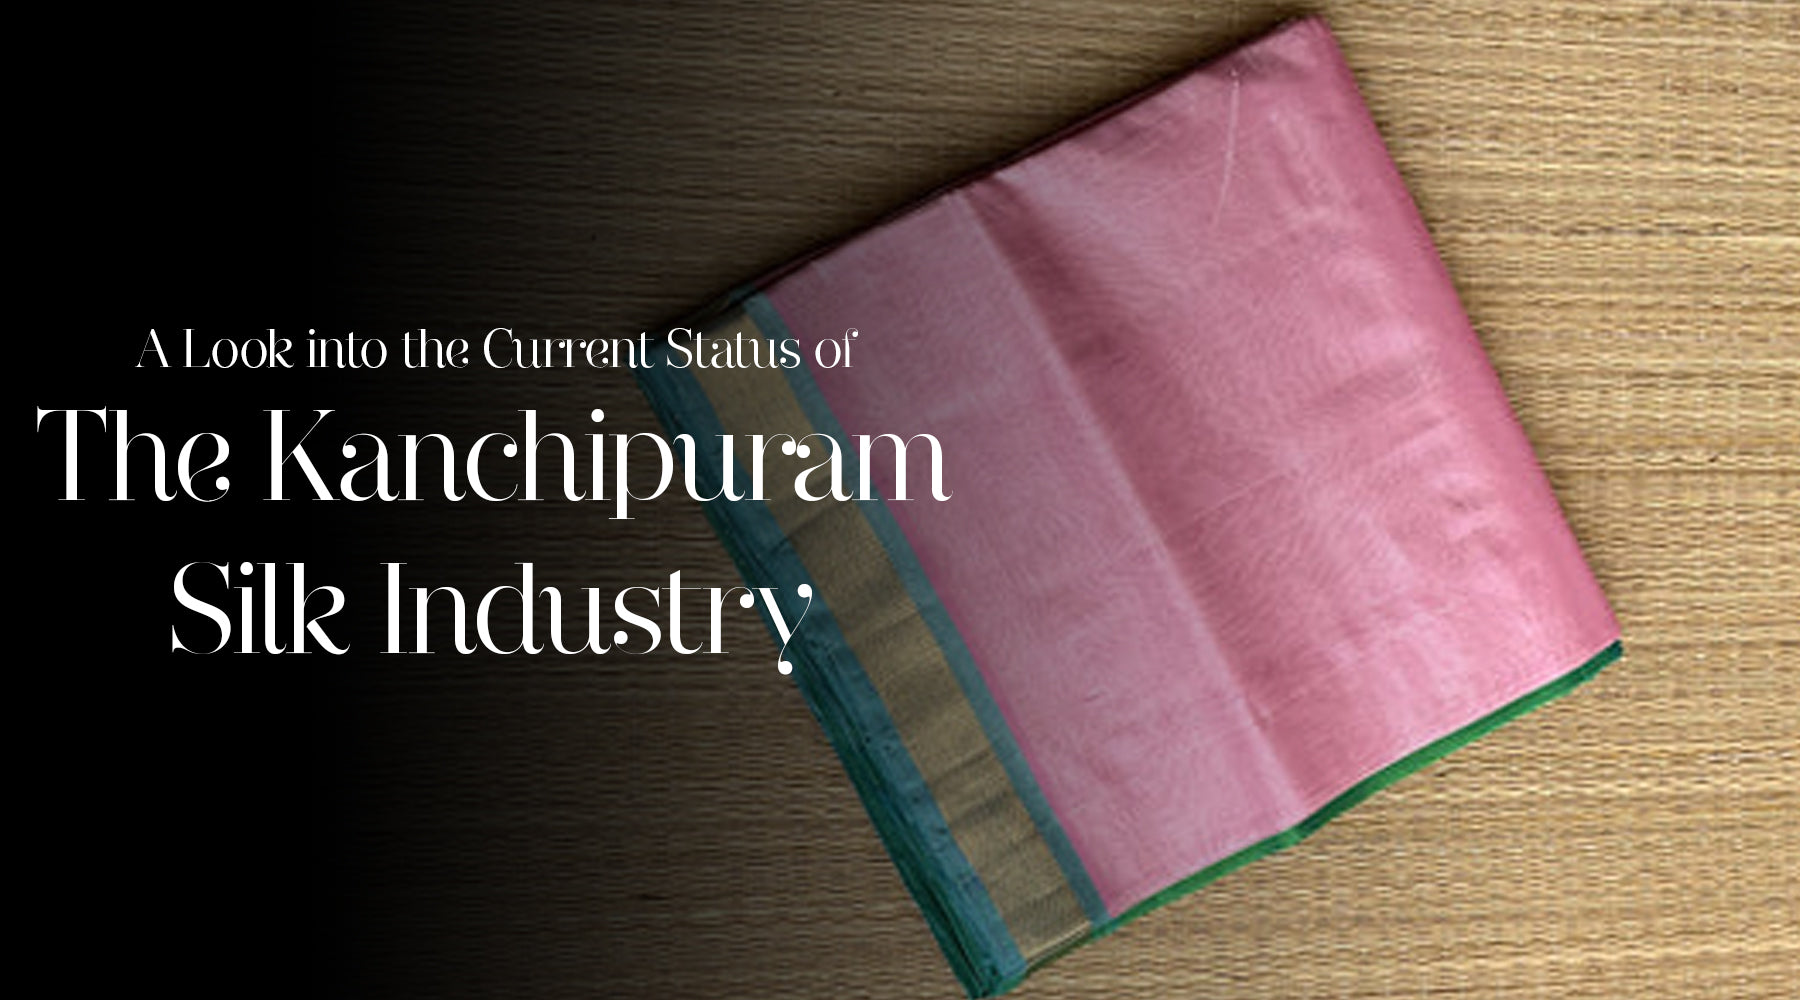 A Look into the Current Status of the Kanchipuram Silk Industry